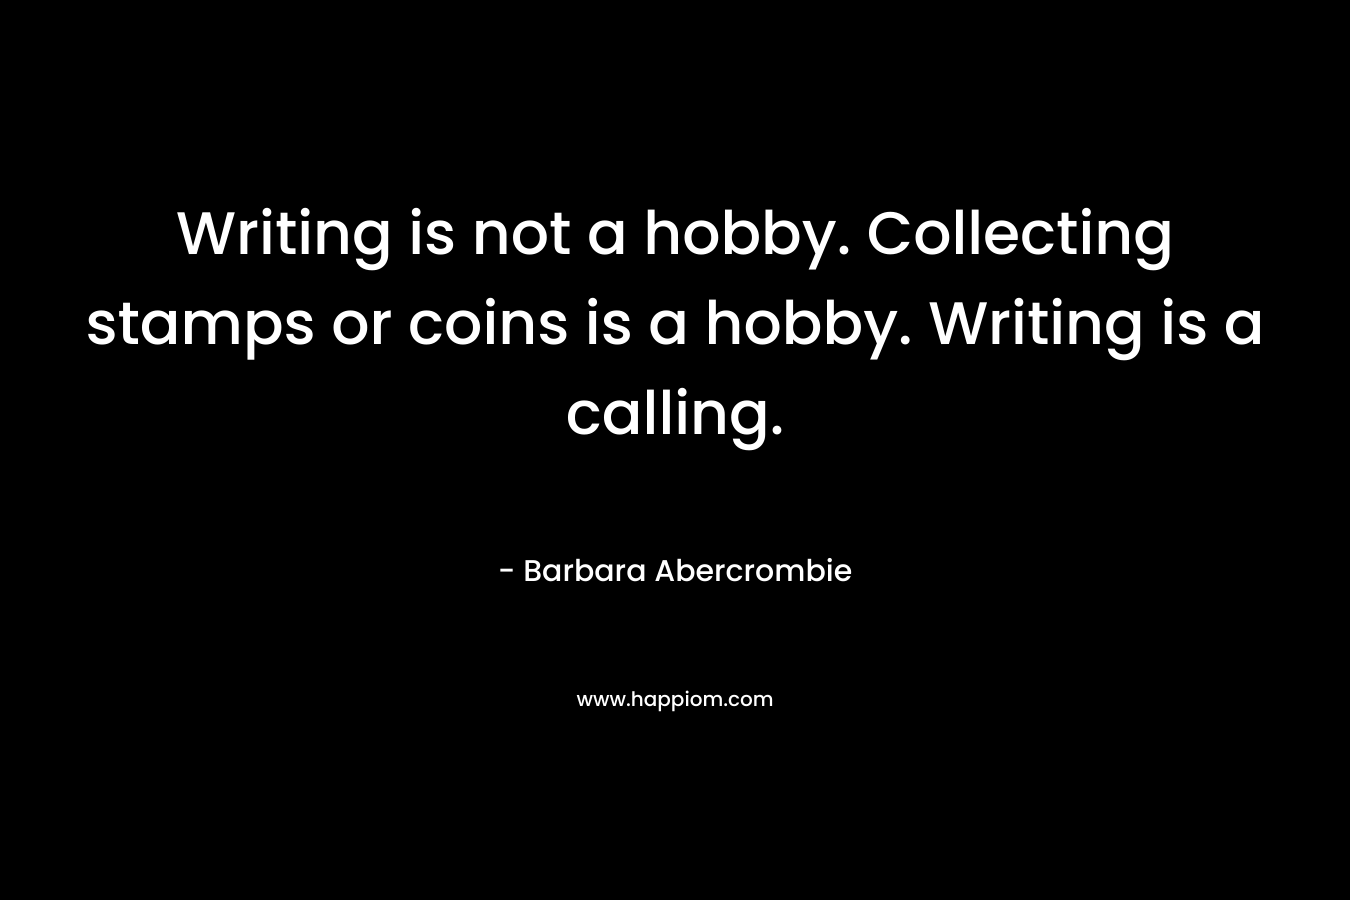 Writing is not a hobby. Collecting stamps or coins is a hobby. Writing is a calling. – Barbara Abercrombie